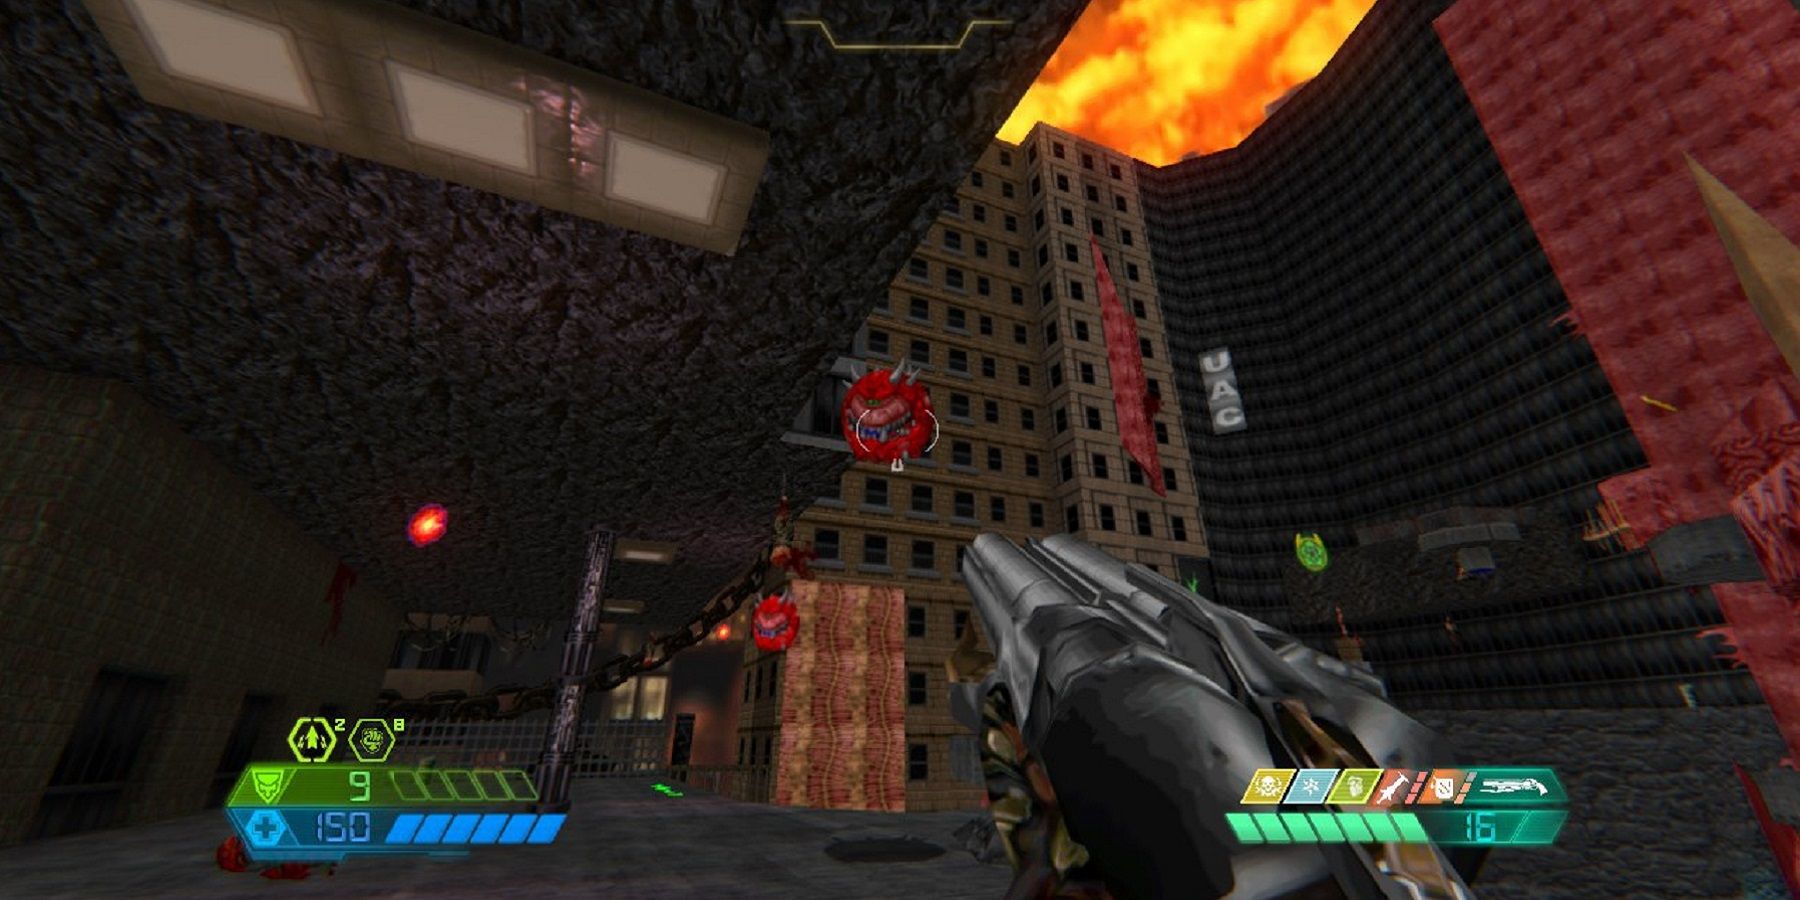 Image from a Doom 2 mod showing the Doom Eternal shotgun about to fire at a classic Cacodemon.